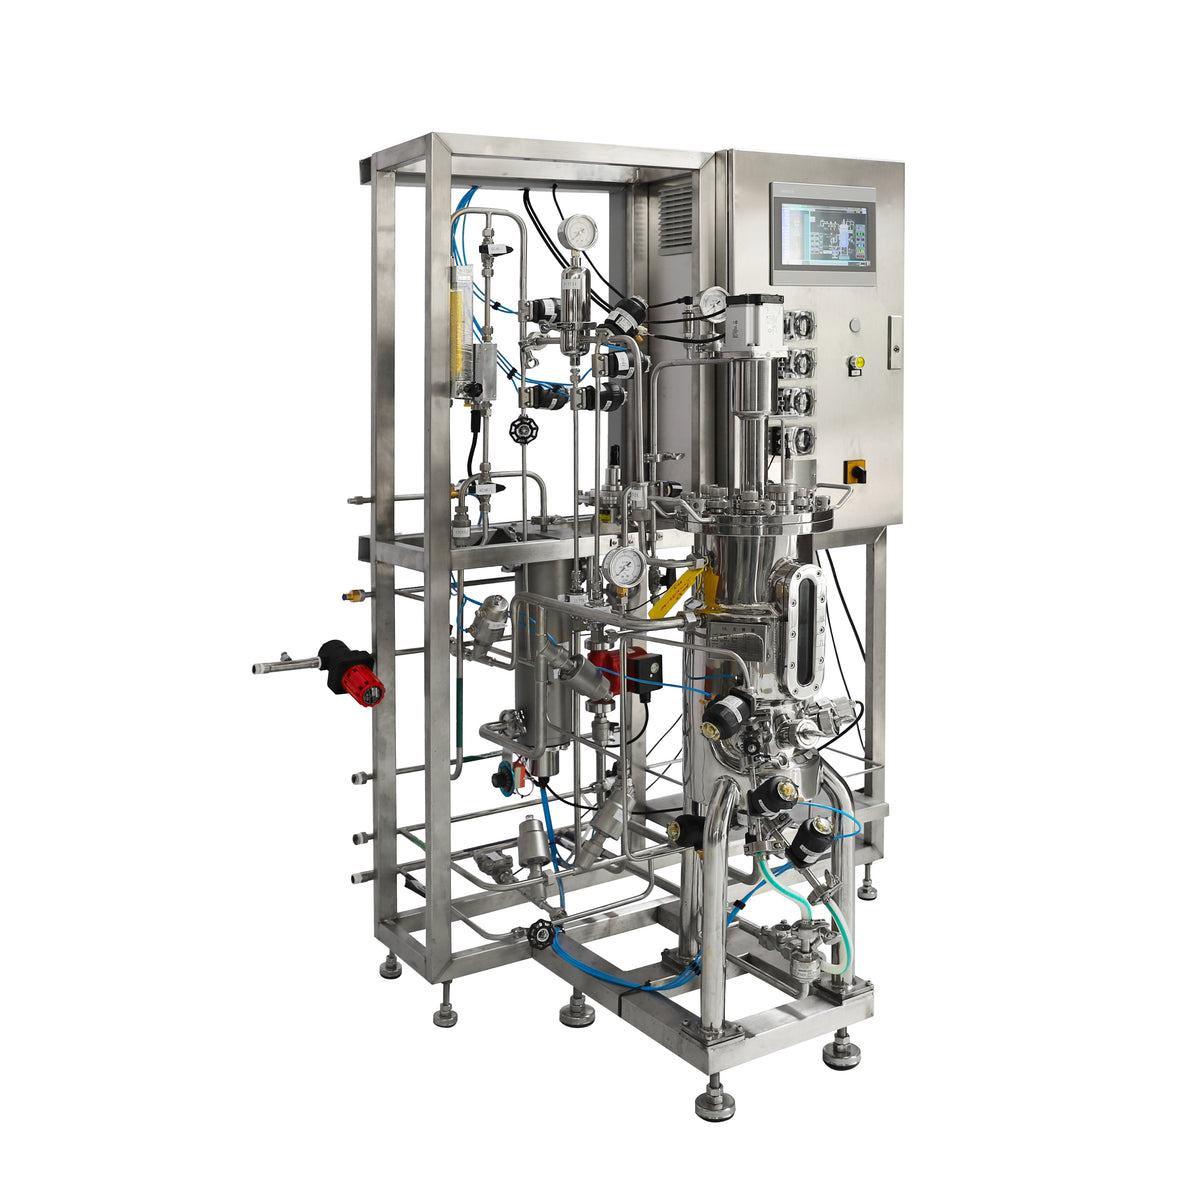 700L Stainless Steel Bioreactor for Microbial Fermentation with 2 Gas Inlets BR500-M1